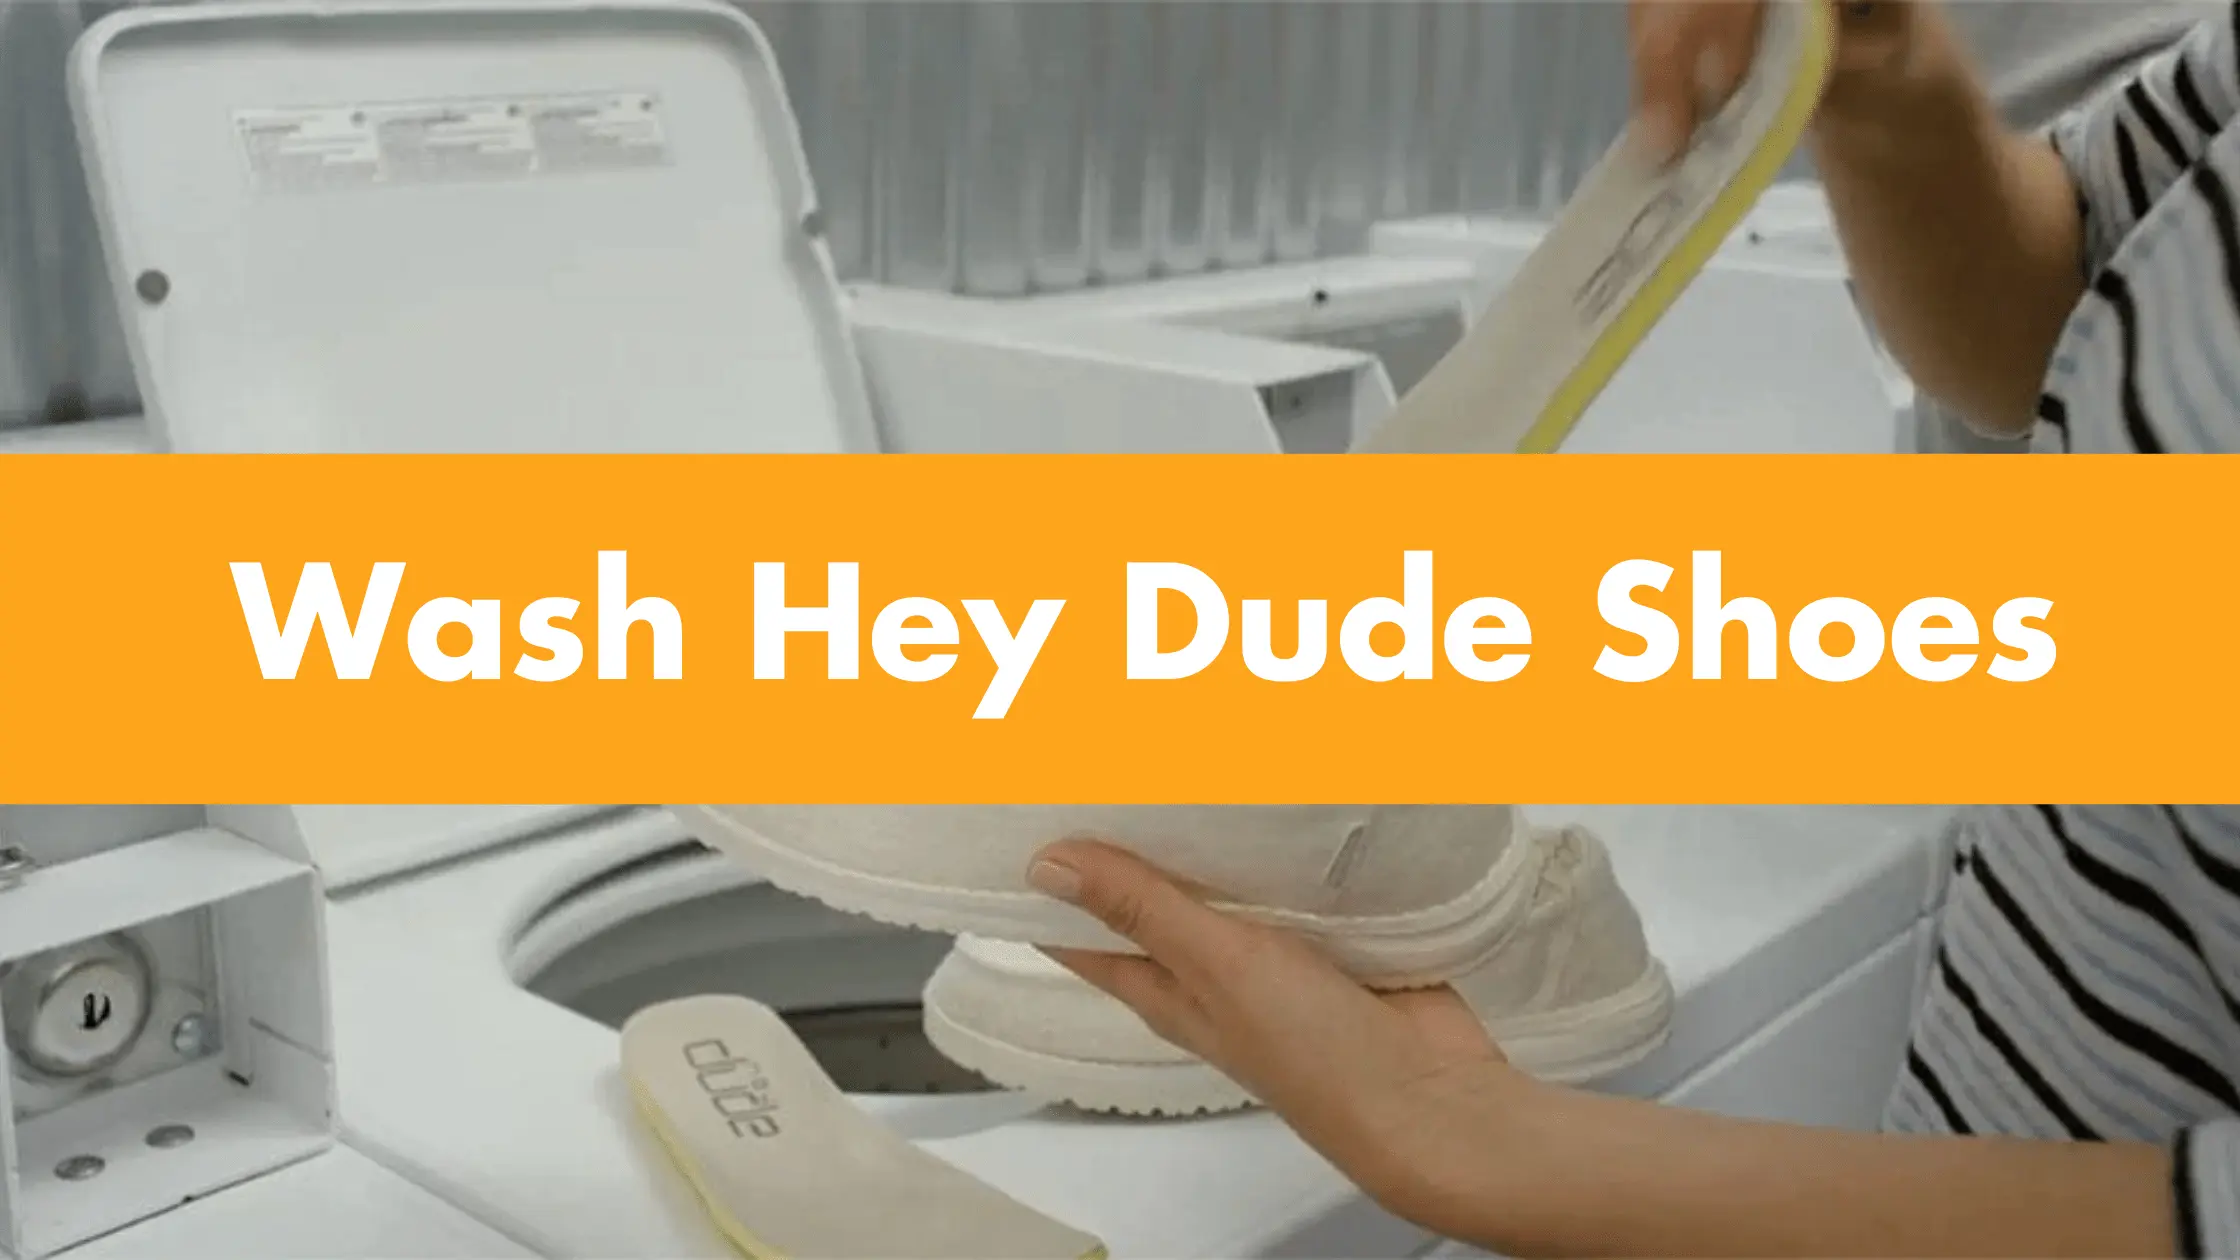 Wash Hey Dude Shoes